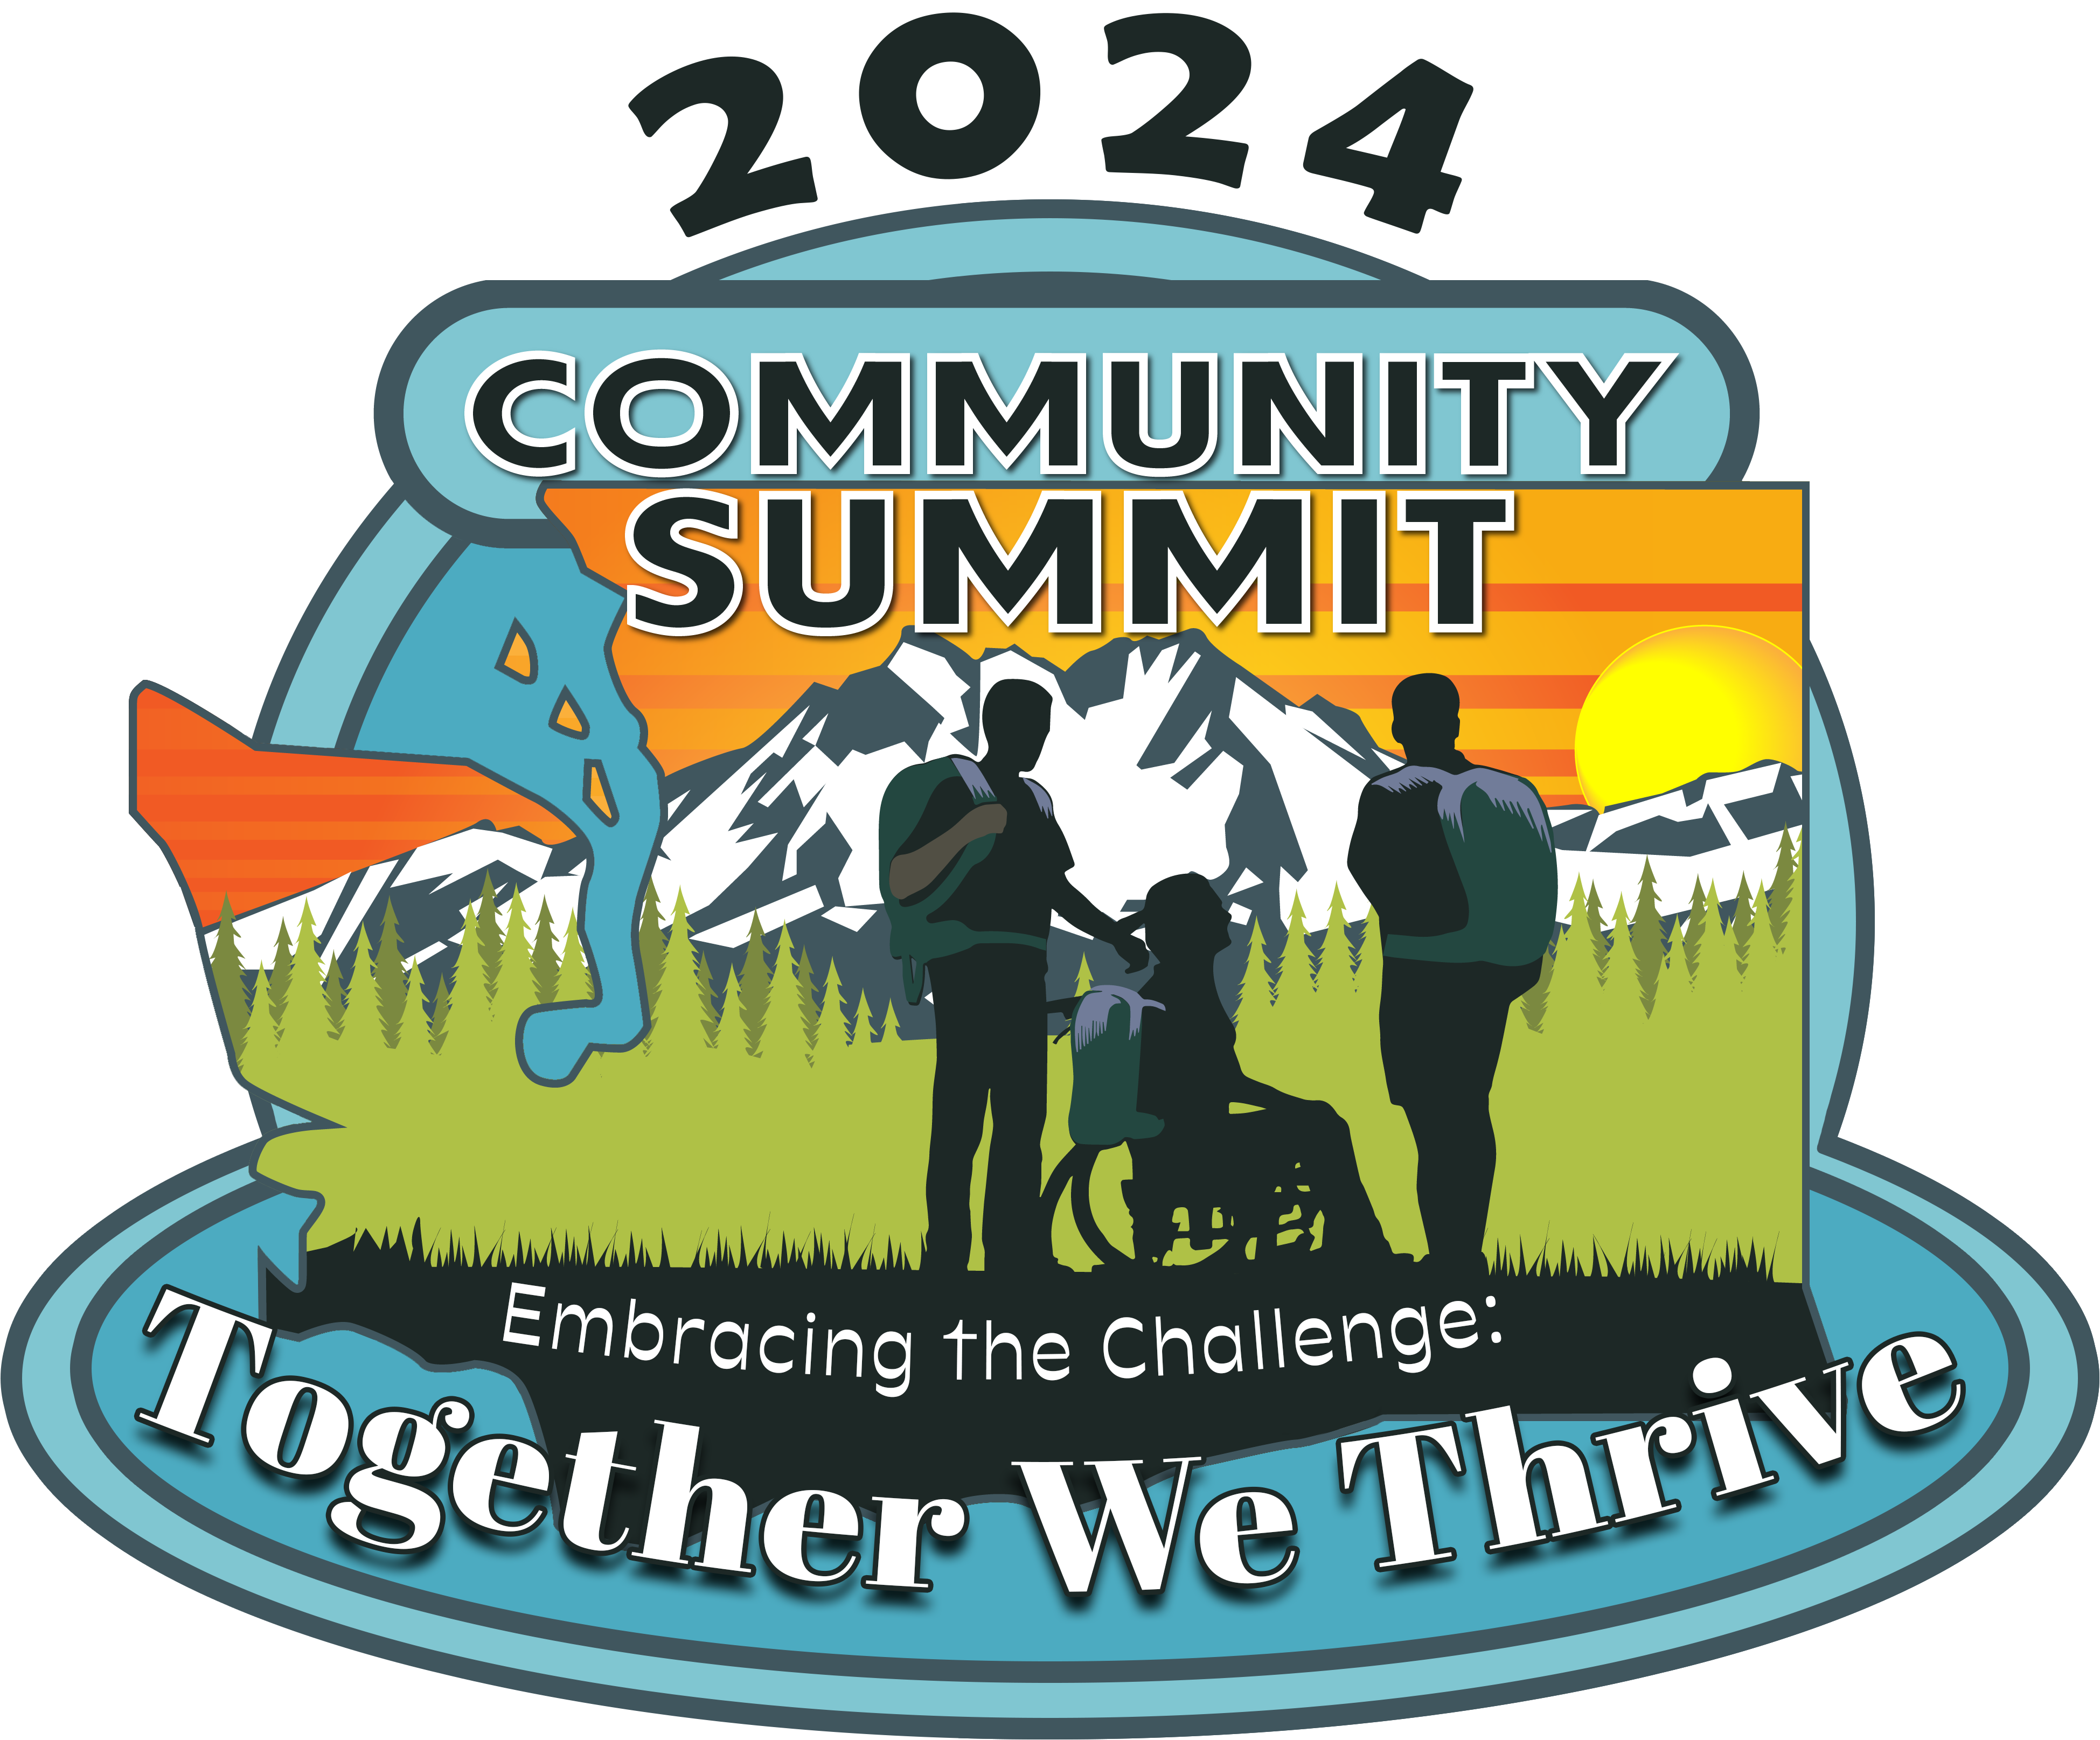 Image: Community Summit 2024, Embracing the Challenge: Together We Thrive logo.